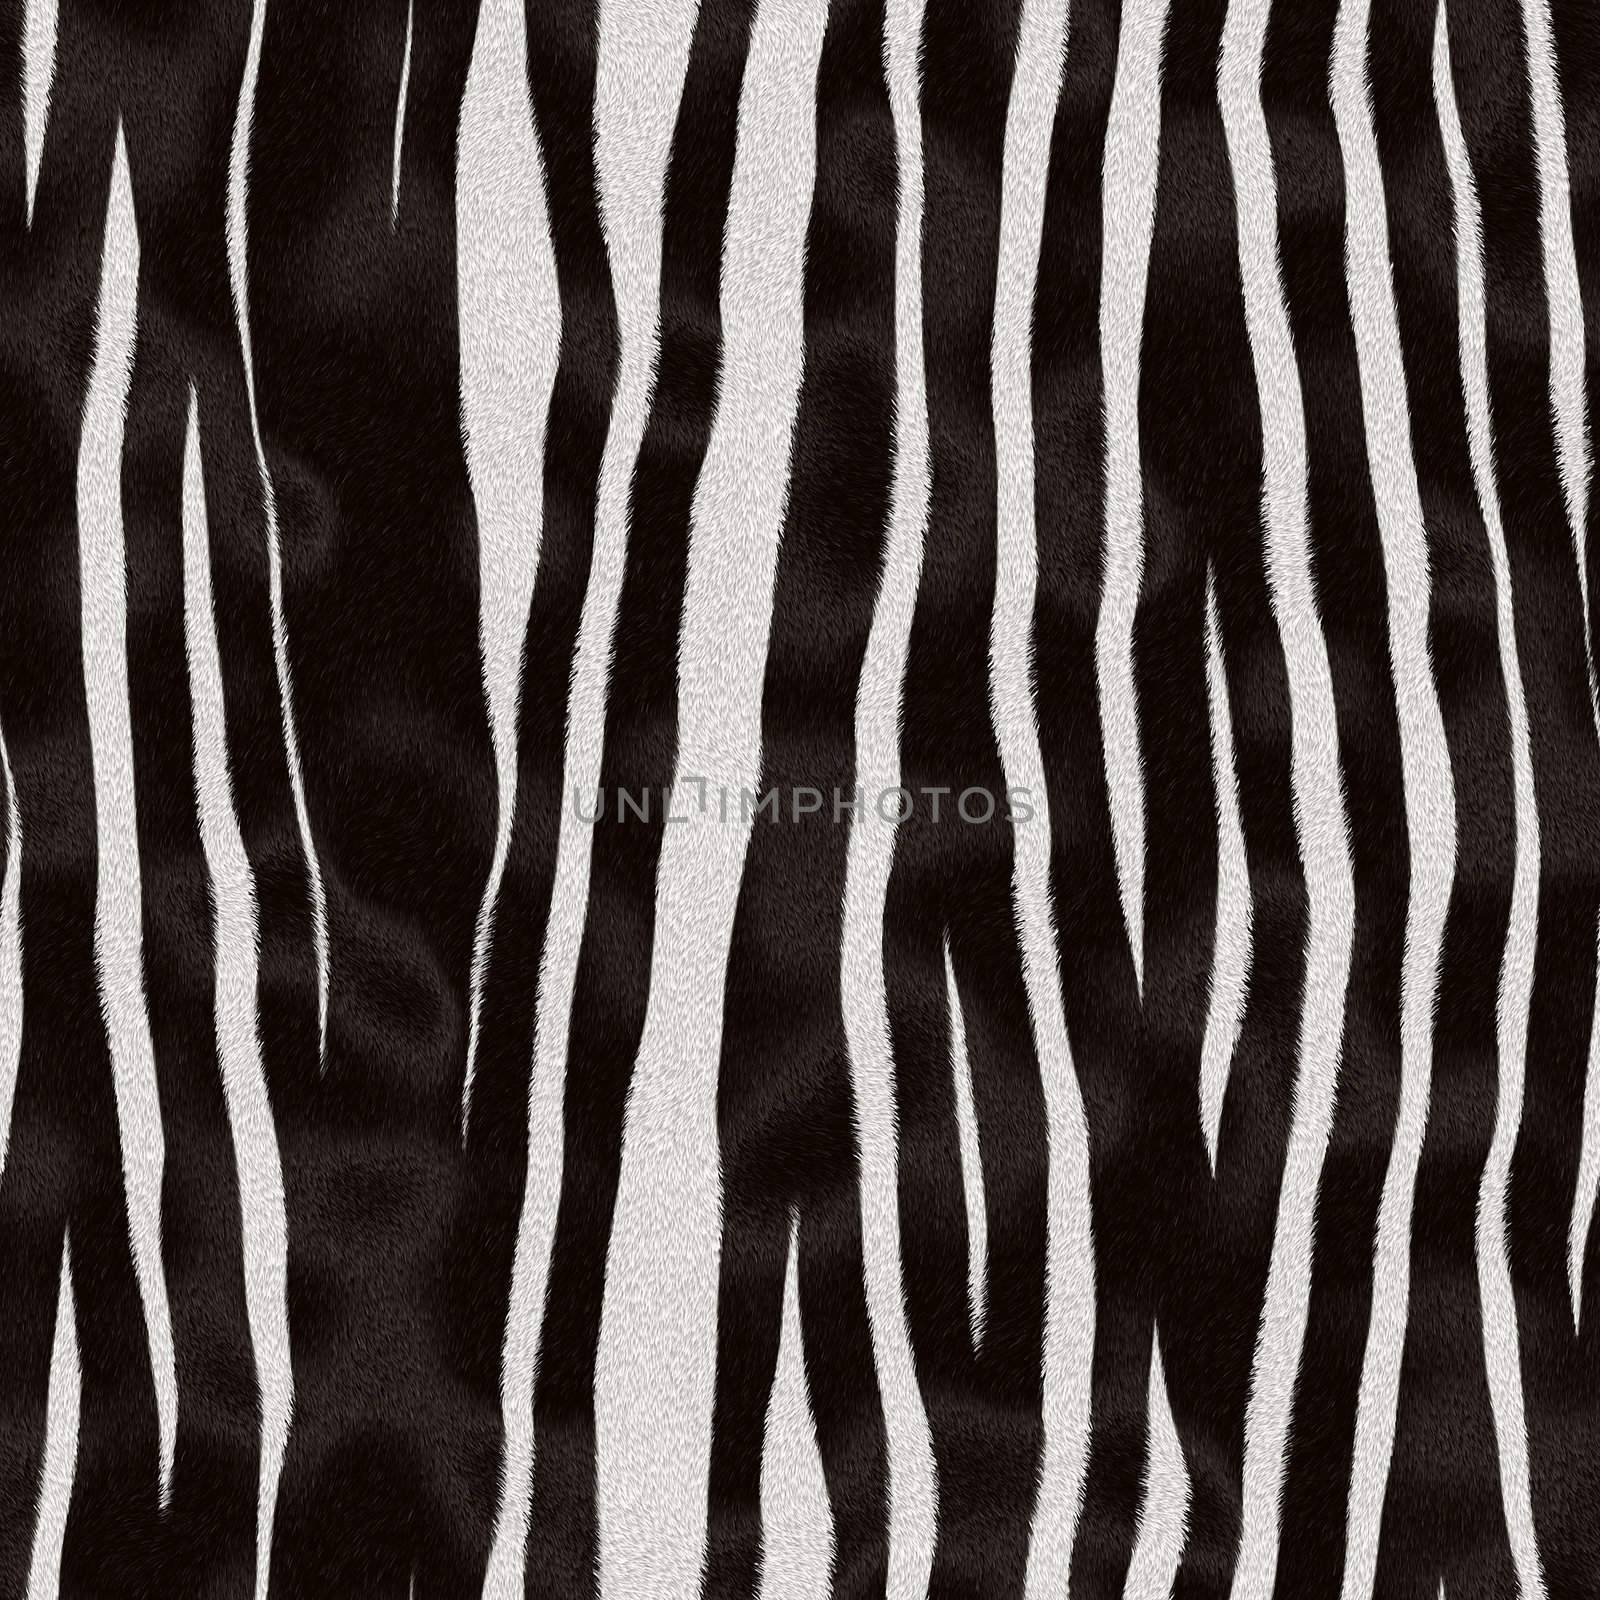 Zebra fur texture with black and white stripes